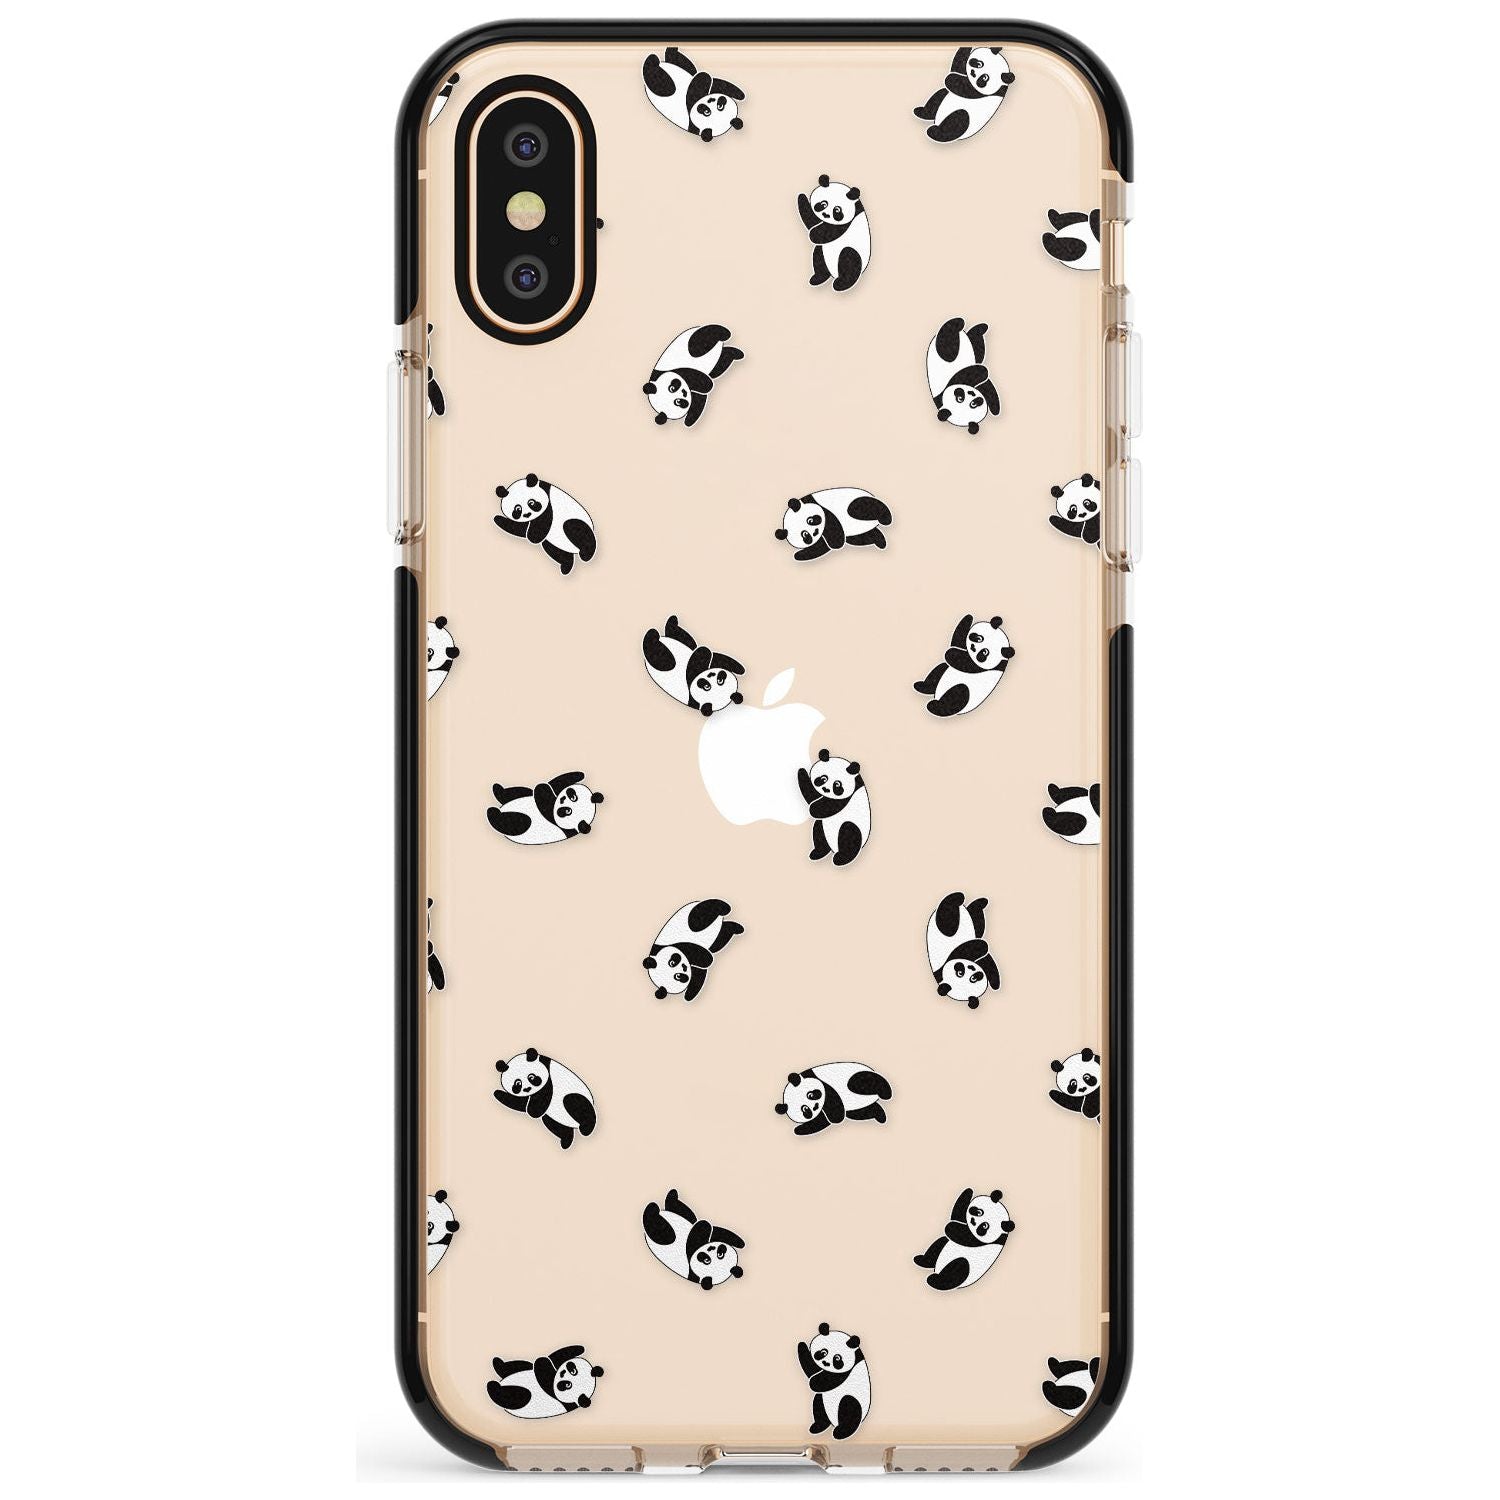 Tiny Panda Pattern Pink Fade Impact Phone Case for iPhone X XS Max XR